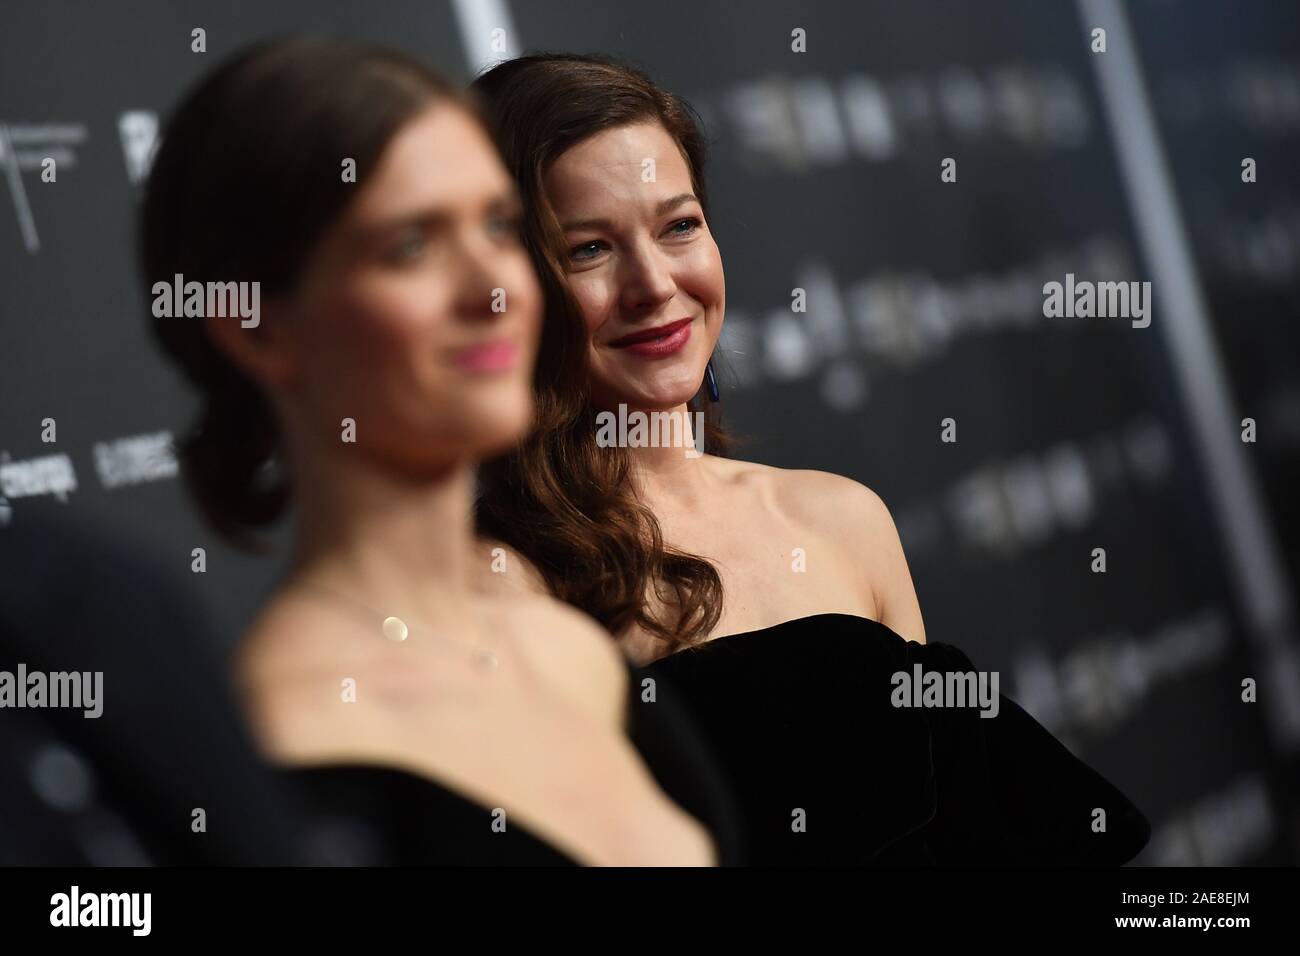 Berlin, Germany.     07th Dec, 2019. Actresses Hannah Herzsprung (r) and Liv Lisa Fries come to the European Film Awards ceremony. Credit: Britta Pedersen/dpa-Zentralbild/dpa/Alamy Live News Credit: dpa picture alliance/Alamy Live News Credit: dpa picture alliance/Alamy Live News Stock Photo